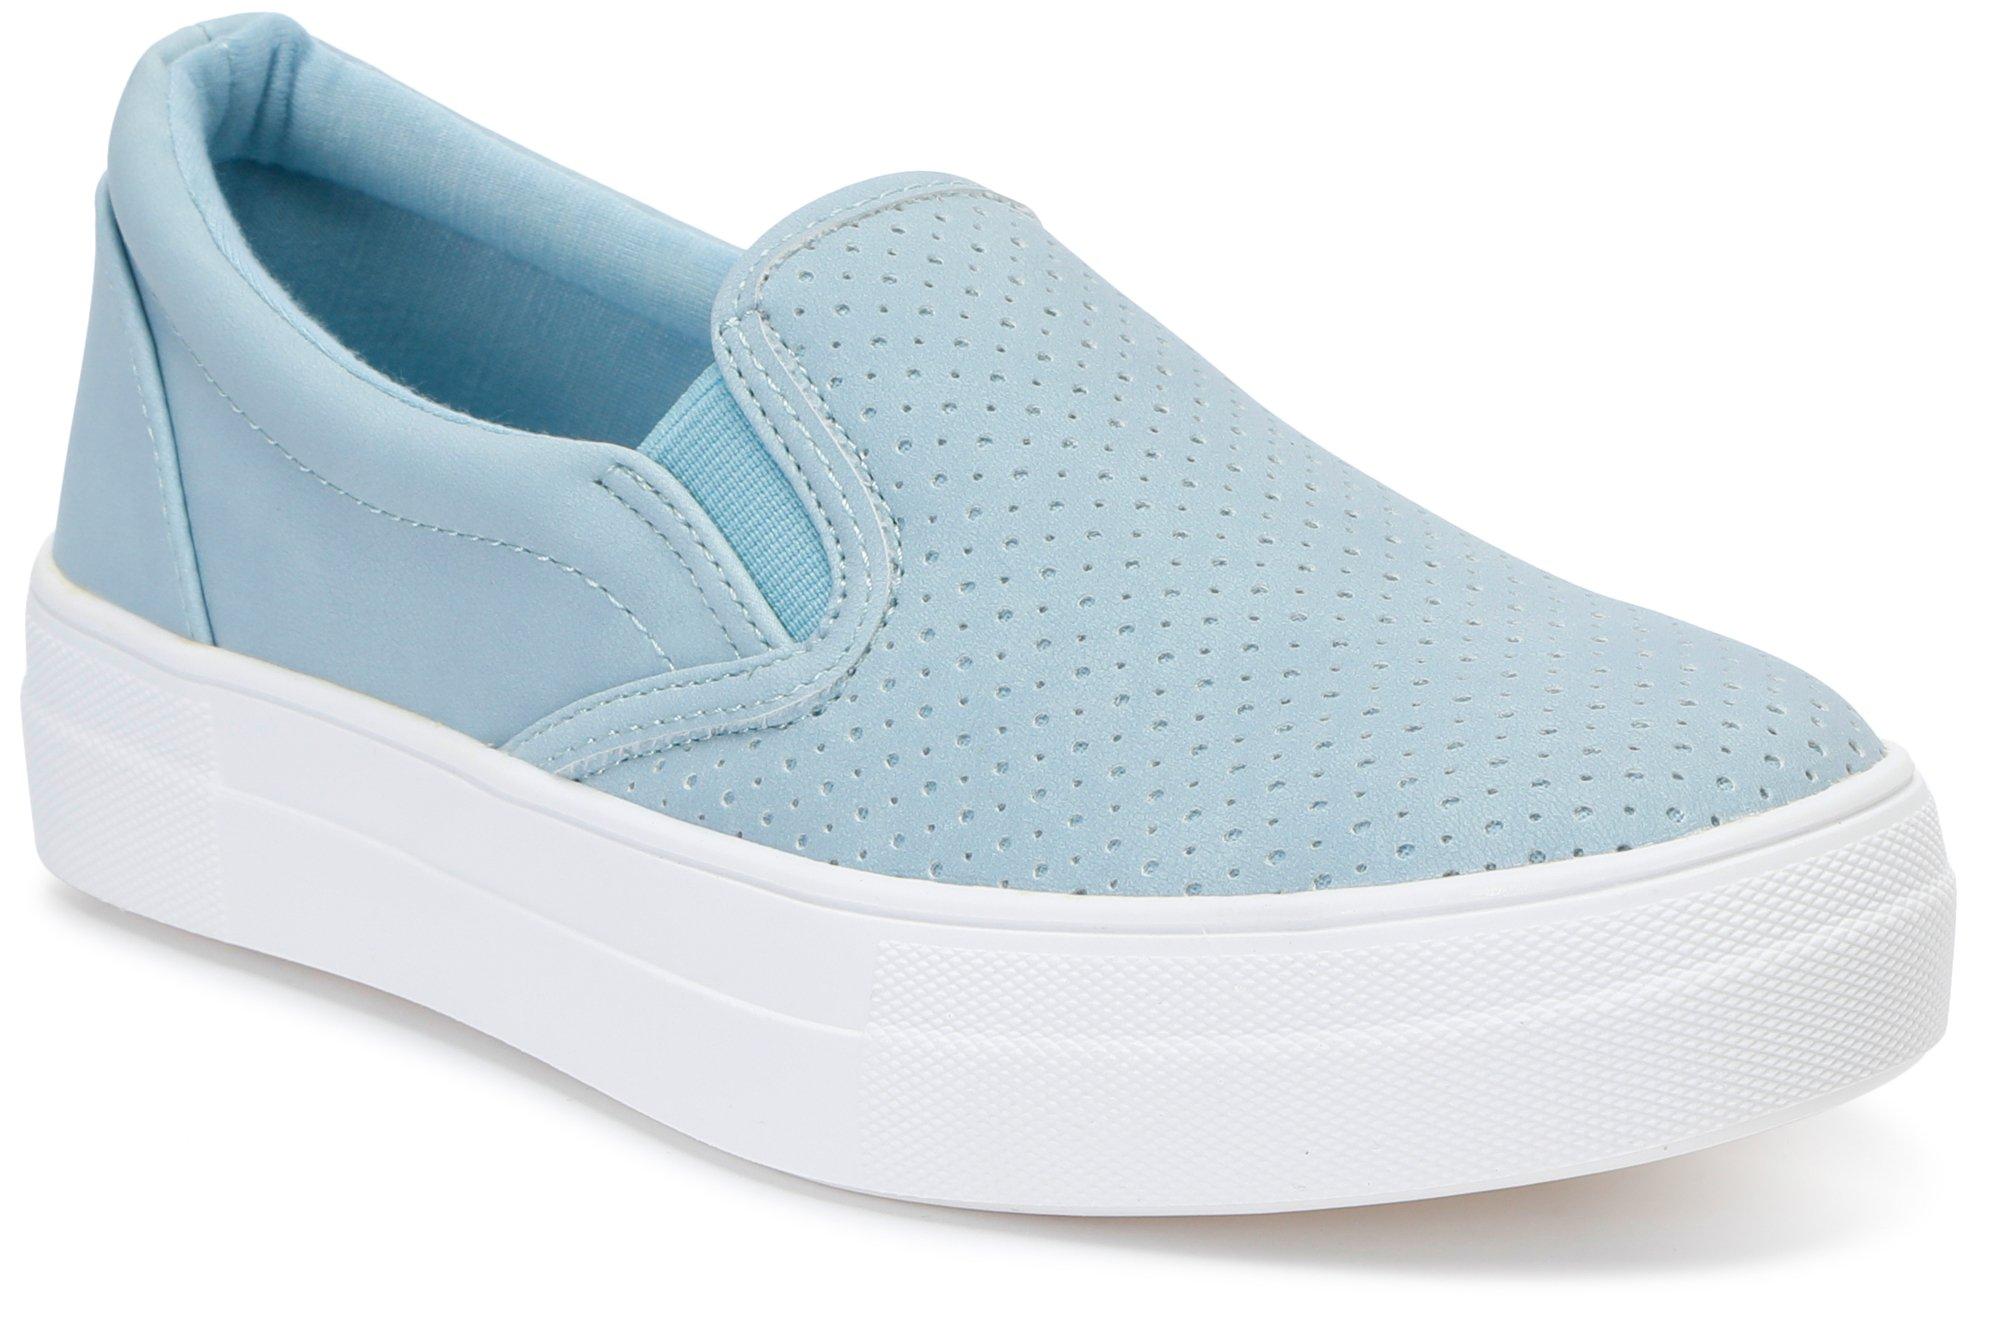 Women's Perforated Slip Ons